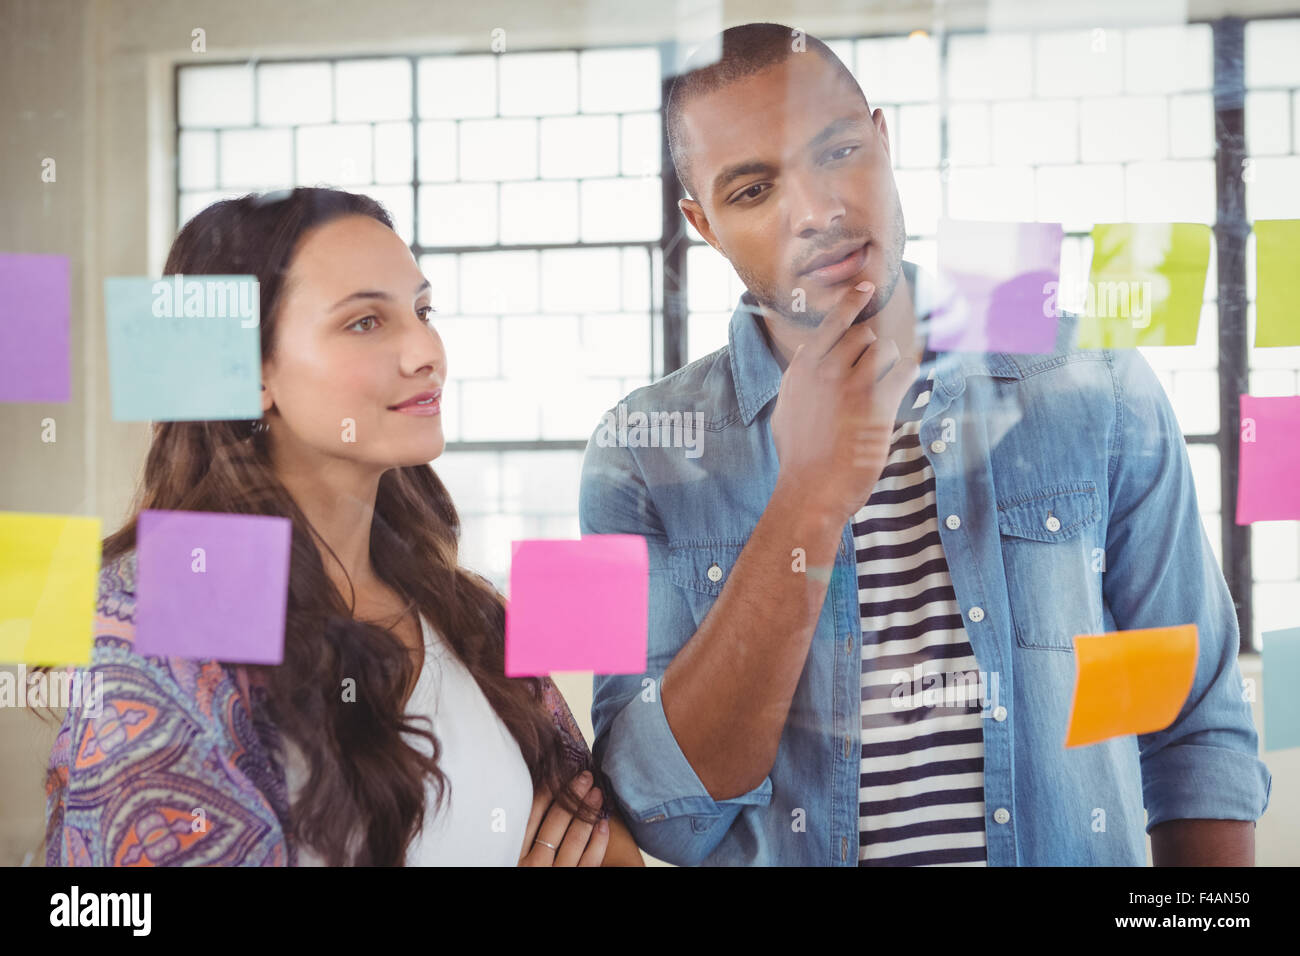 Colleagues looking at sticky notes on glass window Stock Photo